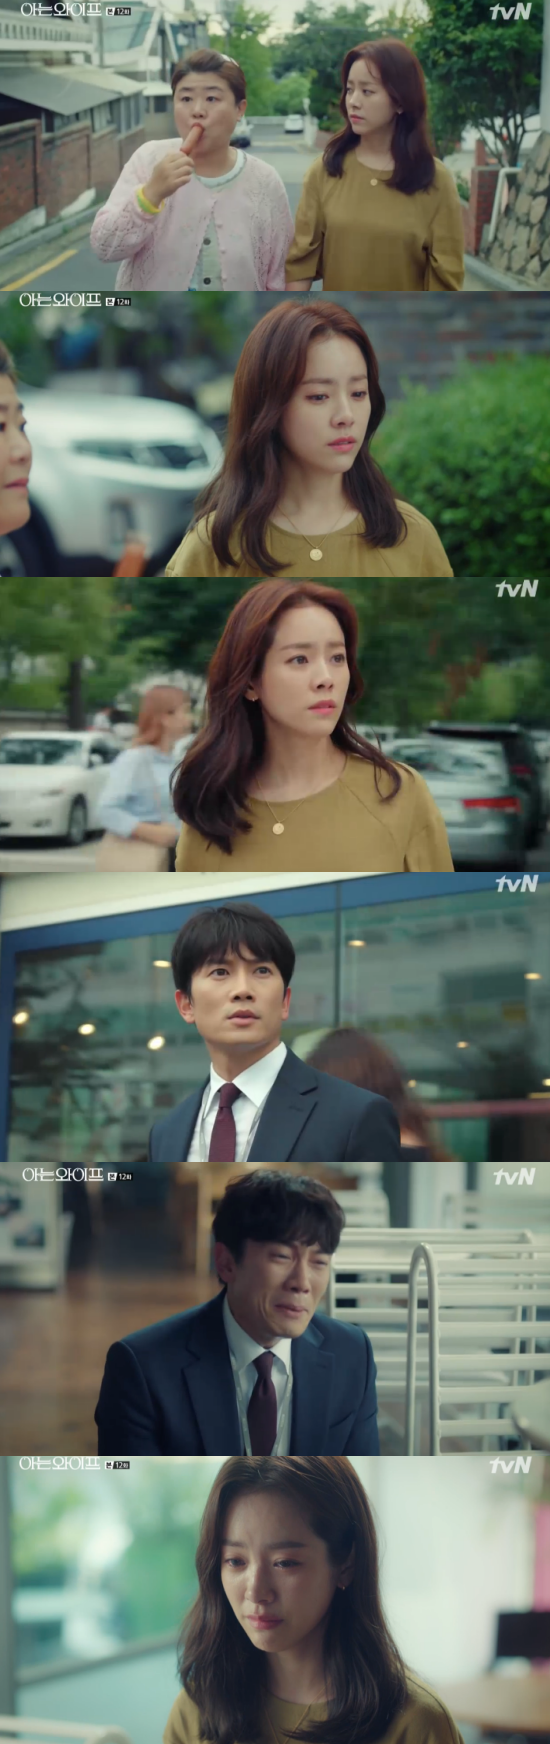 Han Ji-min, a knowing wife, admitted that Ji Sung and his wife were married.In the TVN drama Knowing Wife (playplayplay Yang Hee-seung and director Lee Sang-yeop) broadcast on the 6th, Cha Ju-hyuk (Ji Sung) and Seo Woo Jin (Han Ji-min) were shown talking.On this day, Seo Woo Jin told her mother, I do not go to the company, do you like it? I buy you this. She said, Im waiting.Seo Woo Jin asked, Who waits? And my mother said, Youll wait, a lot. Ill worry.So Seo Woo Jin ran to Cha Ju-hyuk and Cha Ju-hyuk ran to Seo Woo Jin and the two met.After that, Seo Woo Jin went to the cafe, saying, I do not believe it, but I do not even know if it can be, but I have not been able to do anything strange to me, the dreams that have been repeated, the strange actions my mother did to the deputy, the feeling that she was unfamiliar from the beginning, the things that she thought she knew me too well,Its not someone there or you dont know.I understand now, why my mind was so responsive, why did I keep moving toward it, why did you do that? Why did you do that?Why did you throw me away? Why?I was so scared of you changing, Ive had to deal with you all my life, and I dont even know its my fault.If I had been more considerate, if I had listened to you a little more, I would have been able to live as cool and healthy as you. I ruined it.I did stupid Choices, it was too late, but I am so sorry, Woojin. Seo Woo Jin said, Im not the Seo Woo Jin you abandoned, Ill live well without being so weak. Ill give you another chance, you make up for it. Turn it back.Im sorry, but Ill leave it behind and pay it back, and Ill be there for you.